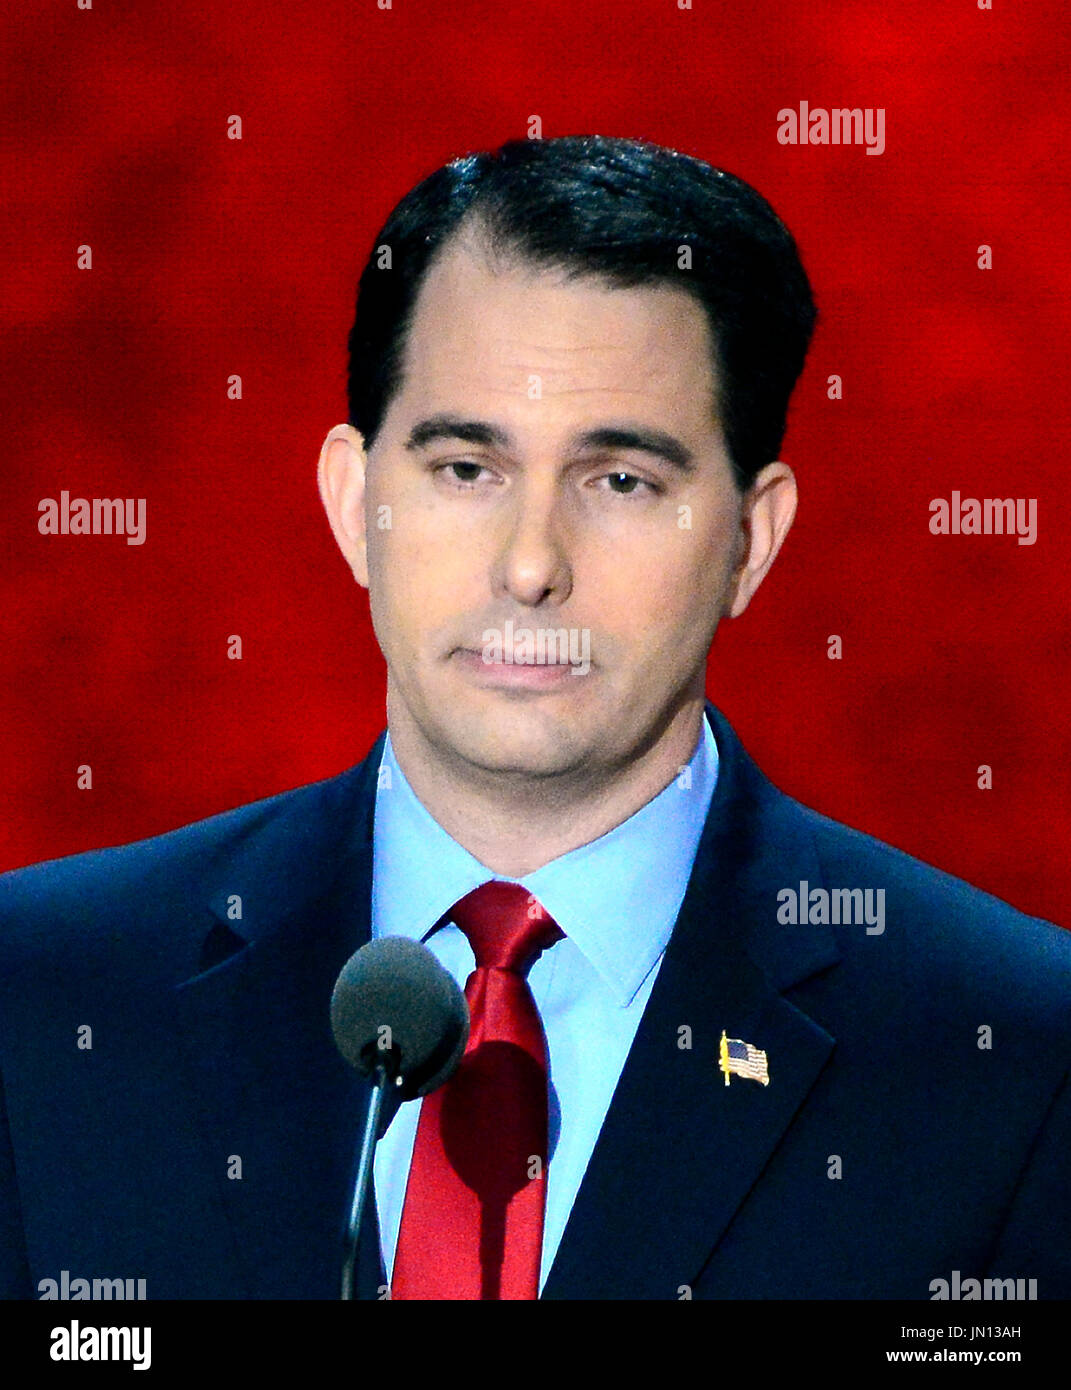 Governor Scott Walker (Republican of Wisconsin) makes remarks at the 2012 Republican National Convention in Tampa Bay, Florida on Tuesday, August 28, 2012.  .Credit: Ron Sachs / CNP.(RESTRICTION: NO New York or New Jersey Newspapers or newspapers within a 75 mile radius of New York City) Stock Photo